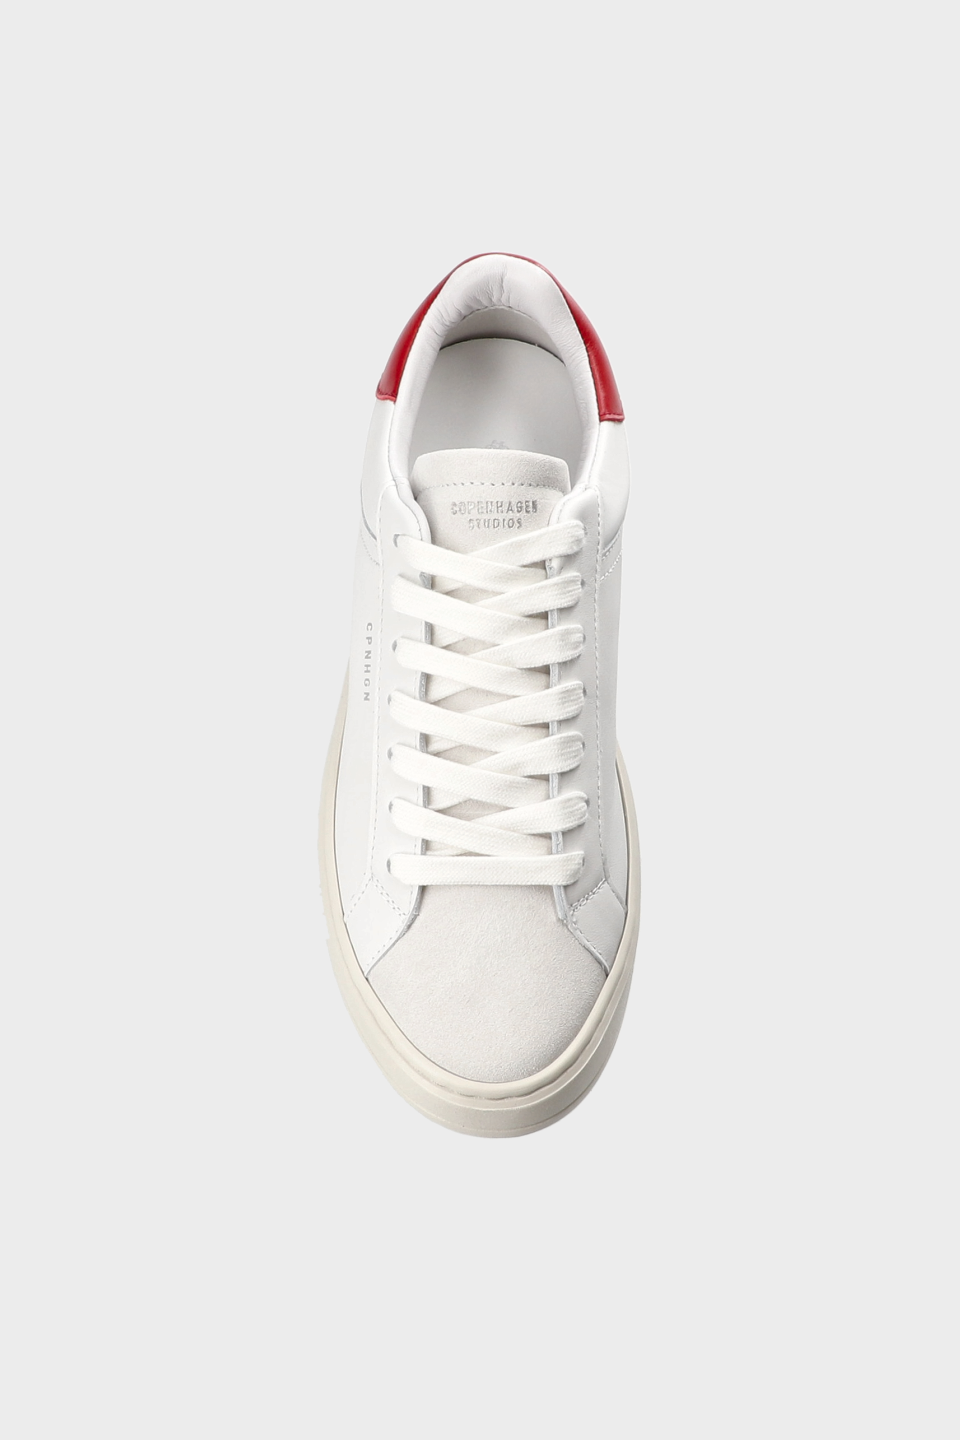 CPH72 leather mix white/red - alternative 1